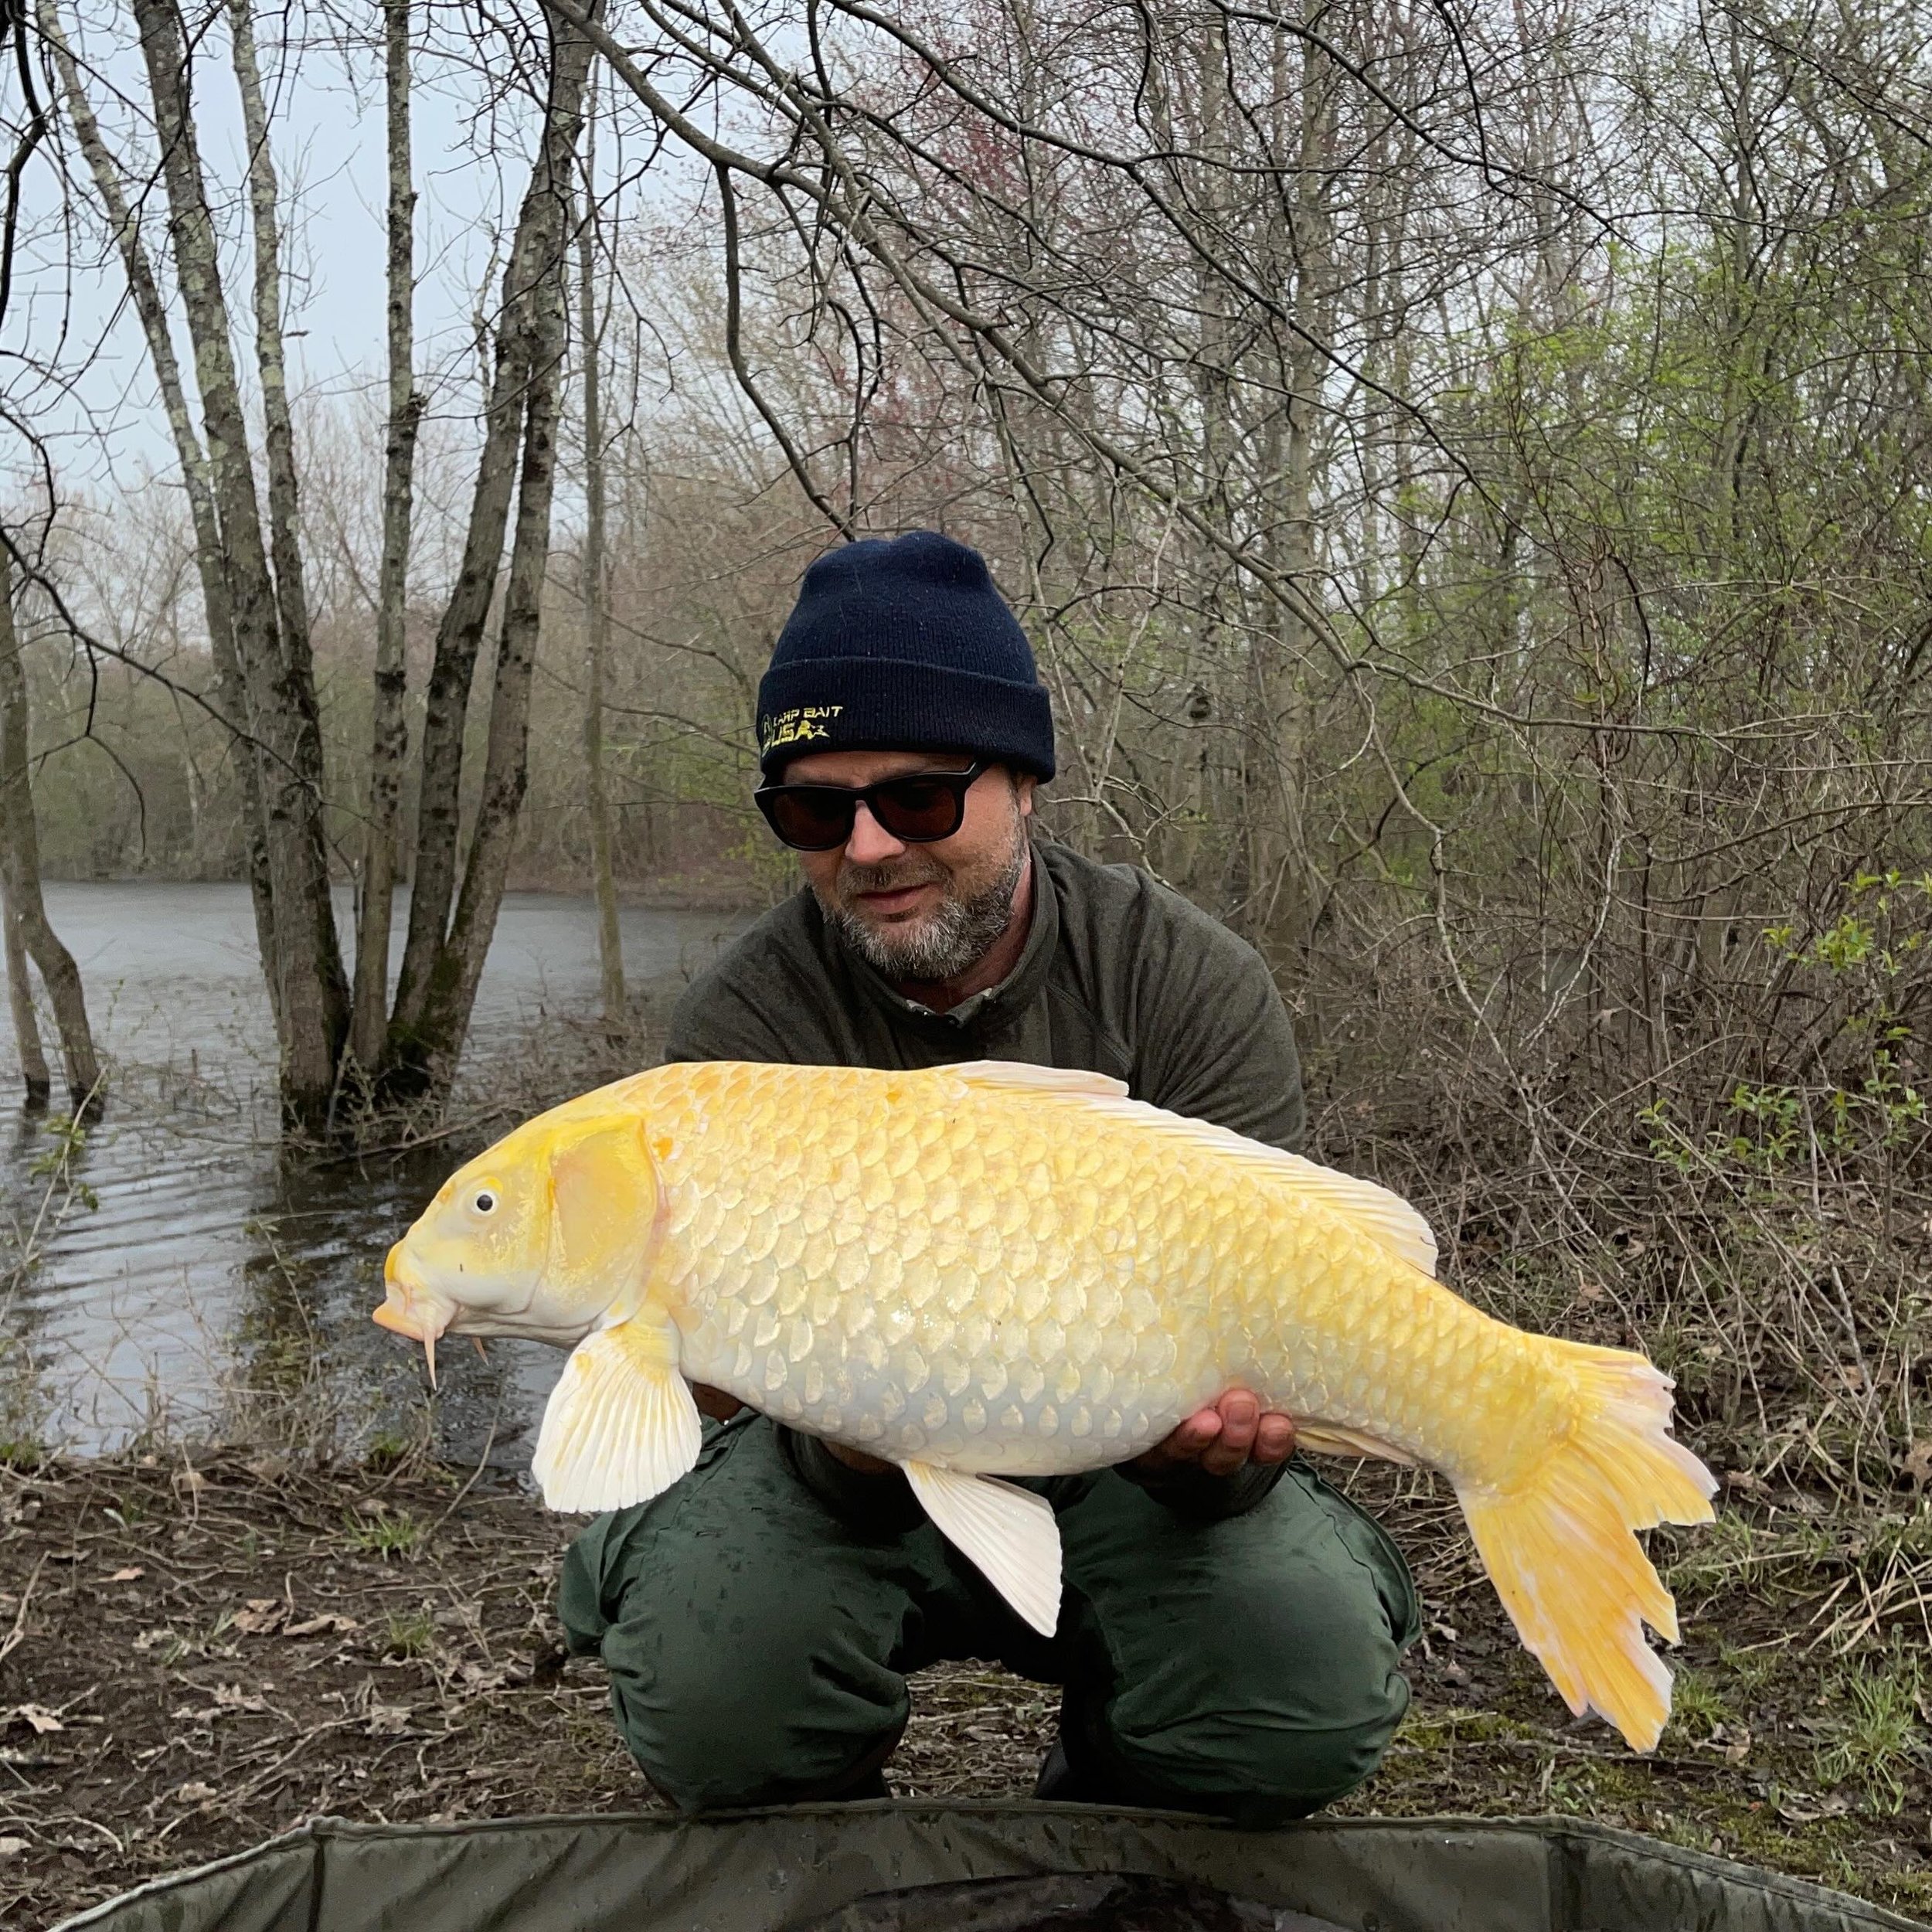 Next in line is another beautiful fish! A re capture for Rad @radek.kula.98  cocoberry Boilies both times!  By the way! Happy Birthday! 

www.carpbaitusa.com #carpbaitusa #carp #carpfishing #carpfishingusa #teamcarpbaitusa #catchandrelease #catchphot